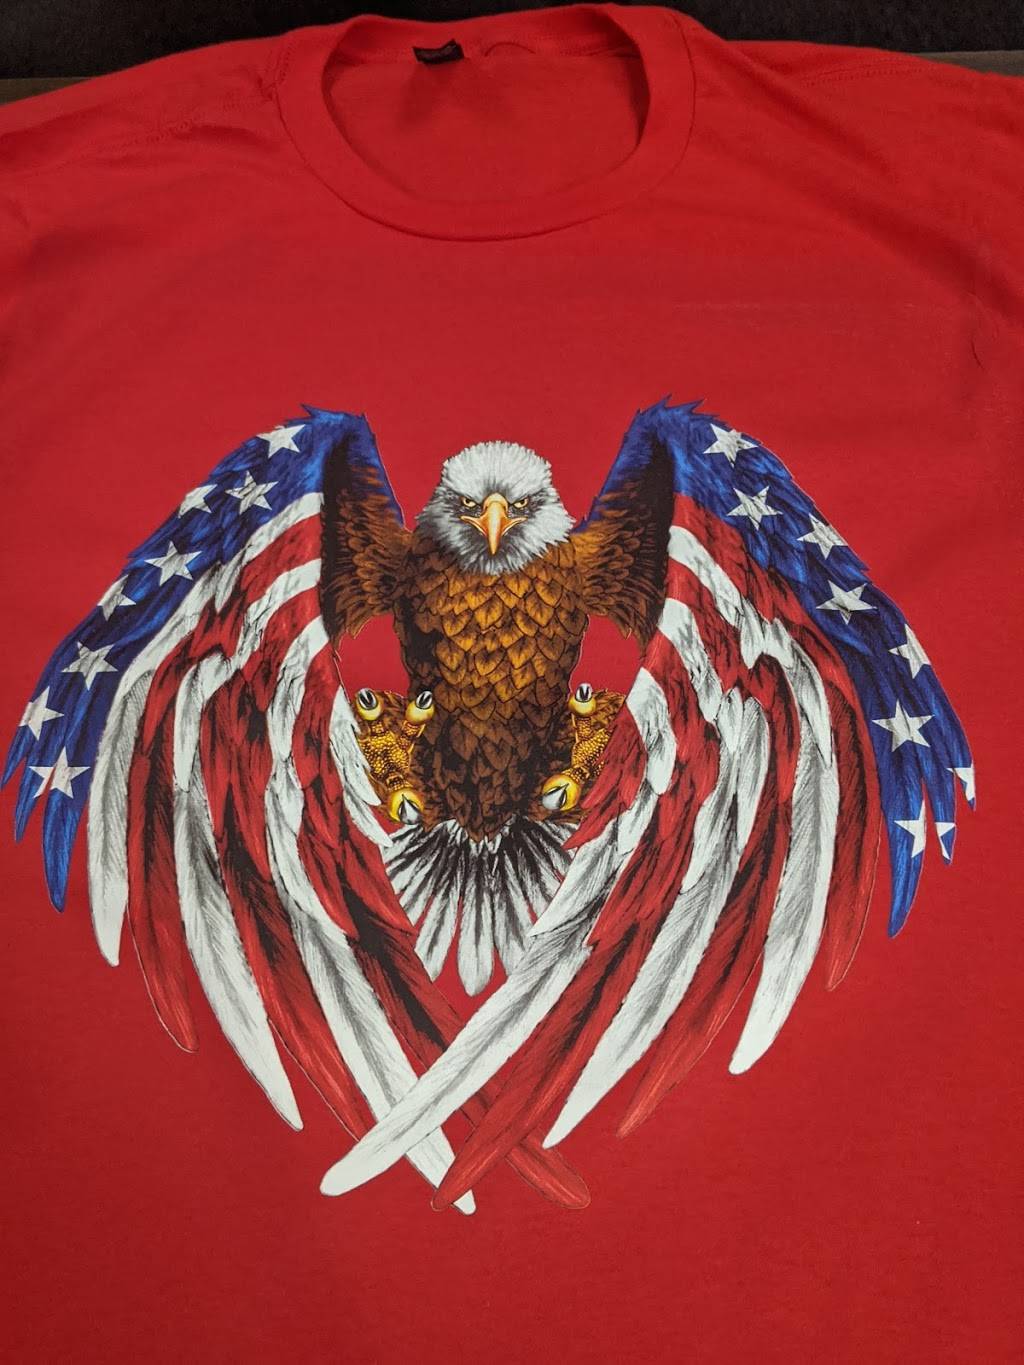 Hines Screen Printing and Embroidery | 4243 Sunbeam Rd #5, Jacksonville, FL 32257, USA | Phone: (904) 398-5110